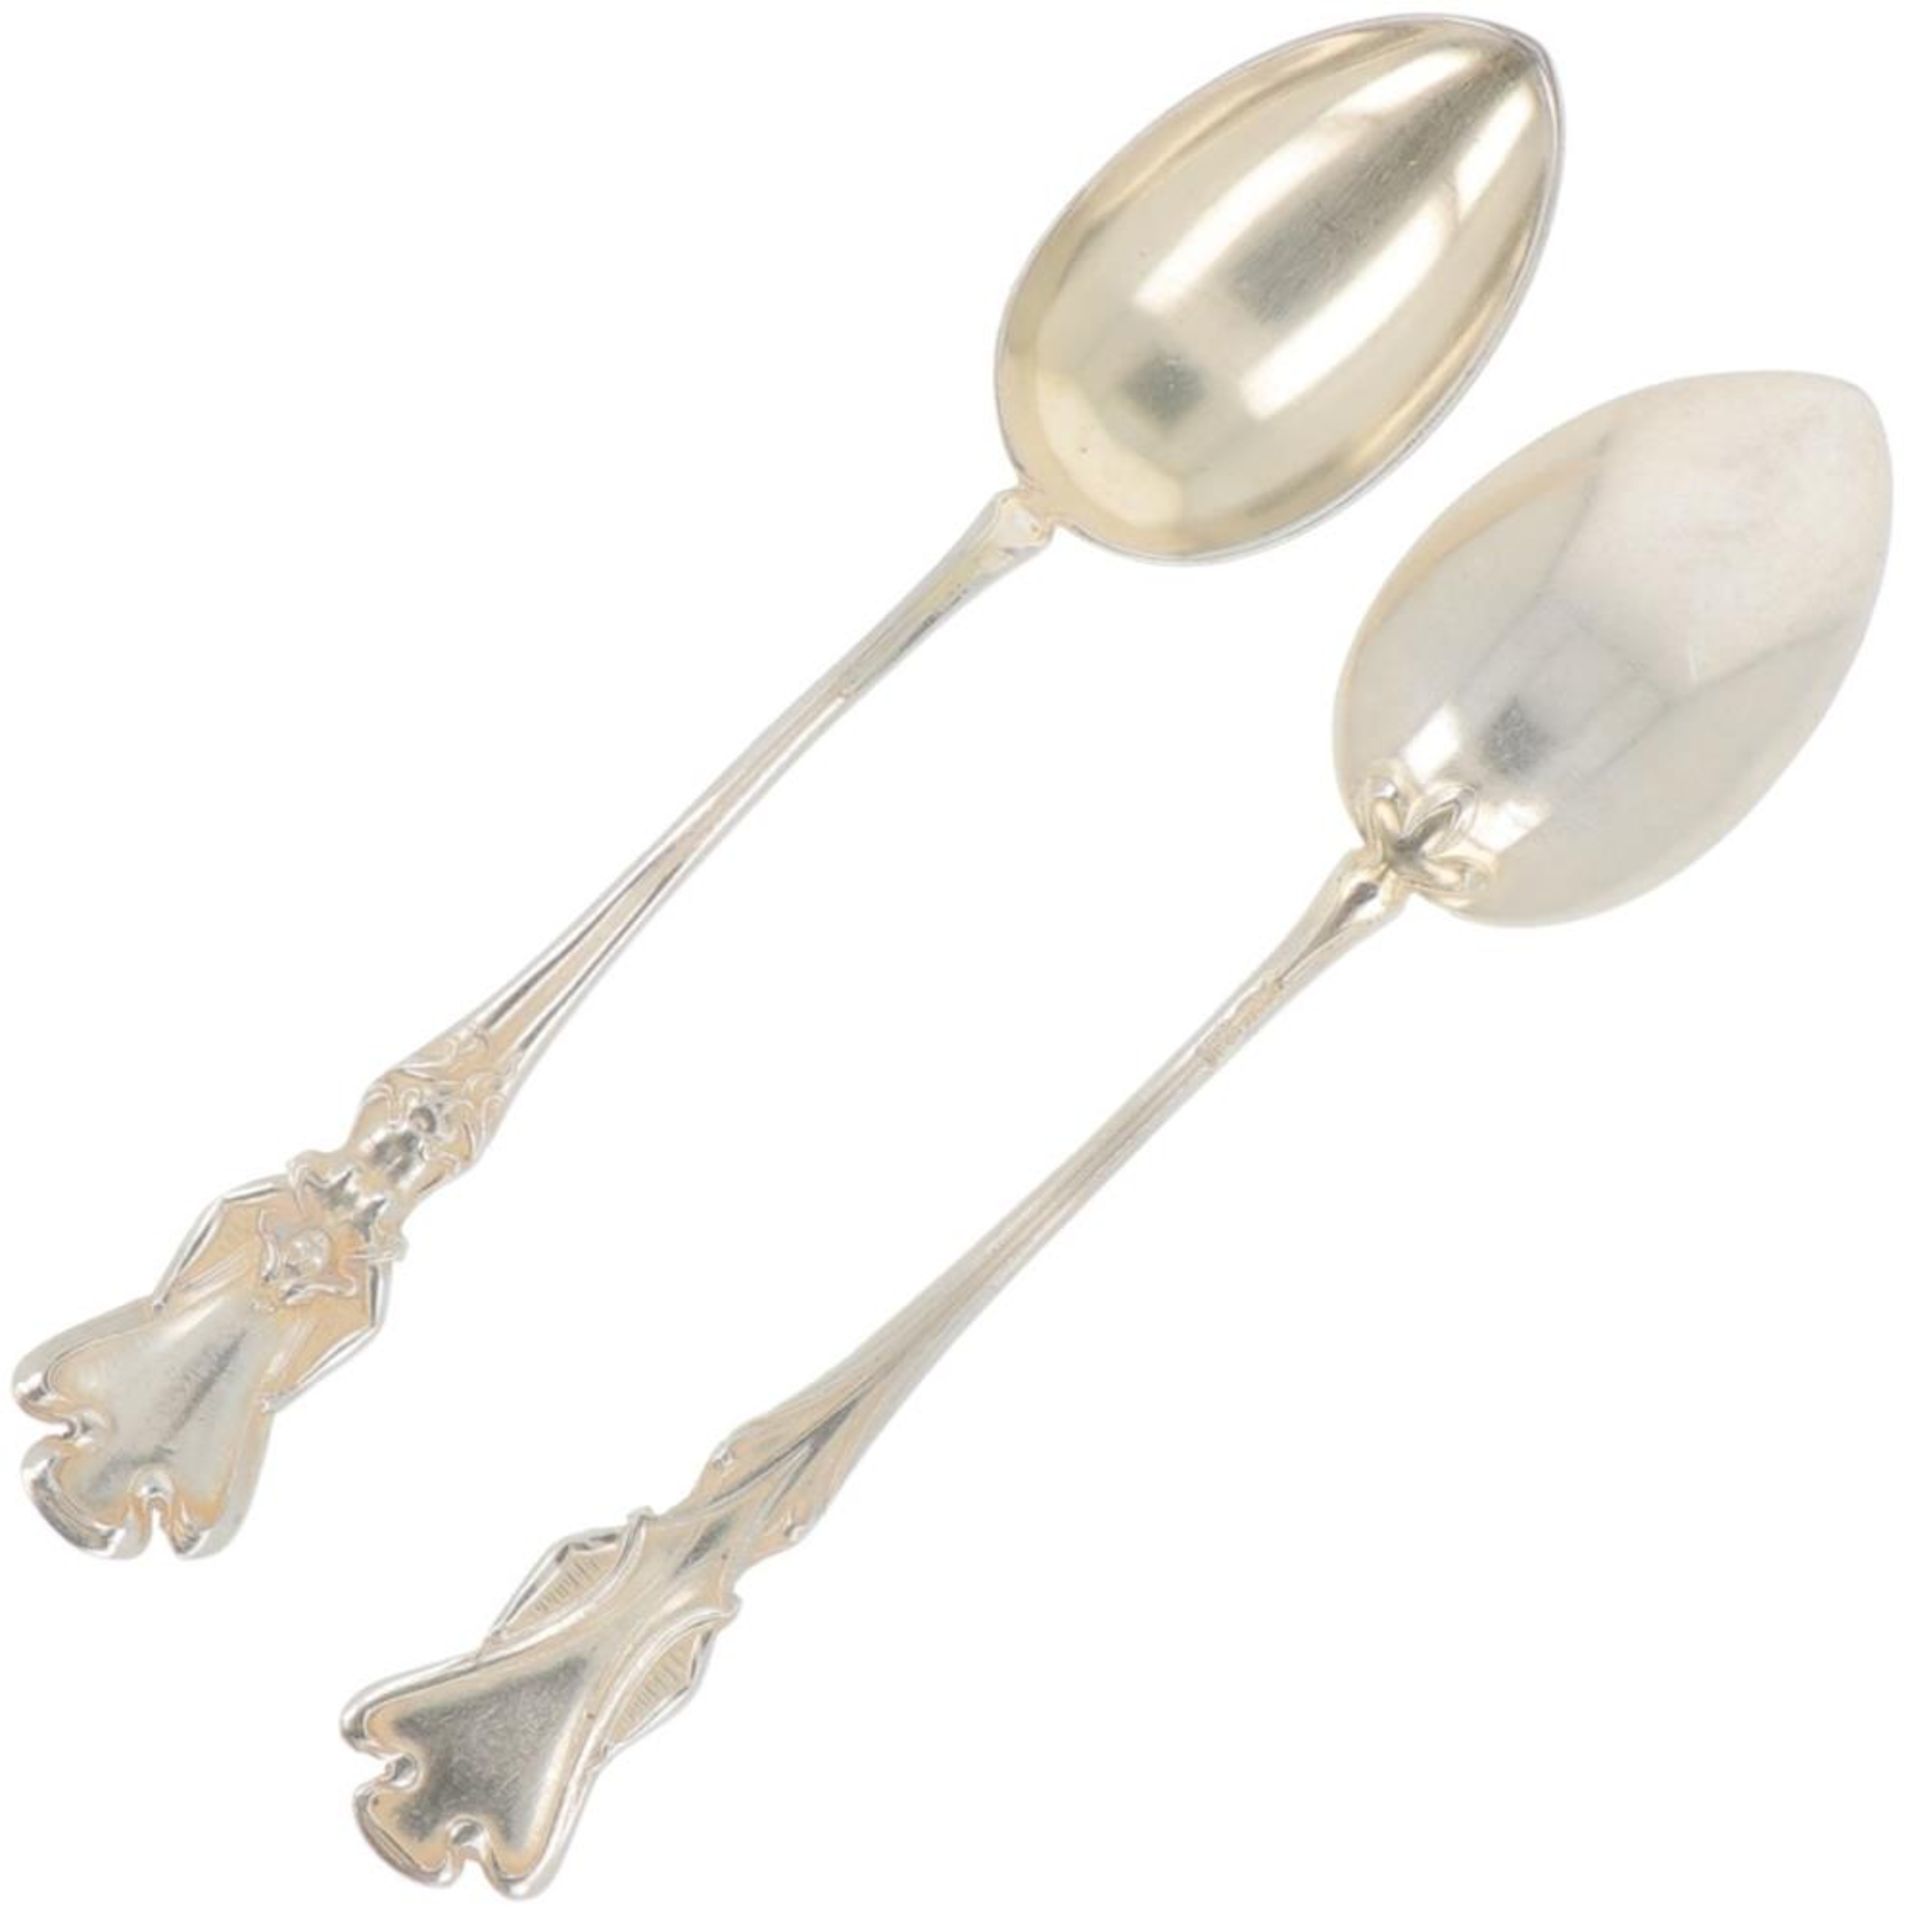 (12) piece set of silver teaspoons. - Image 2 of 3